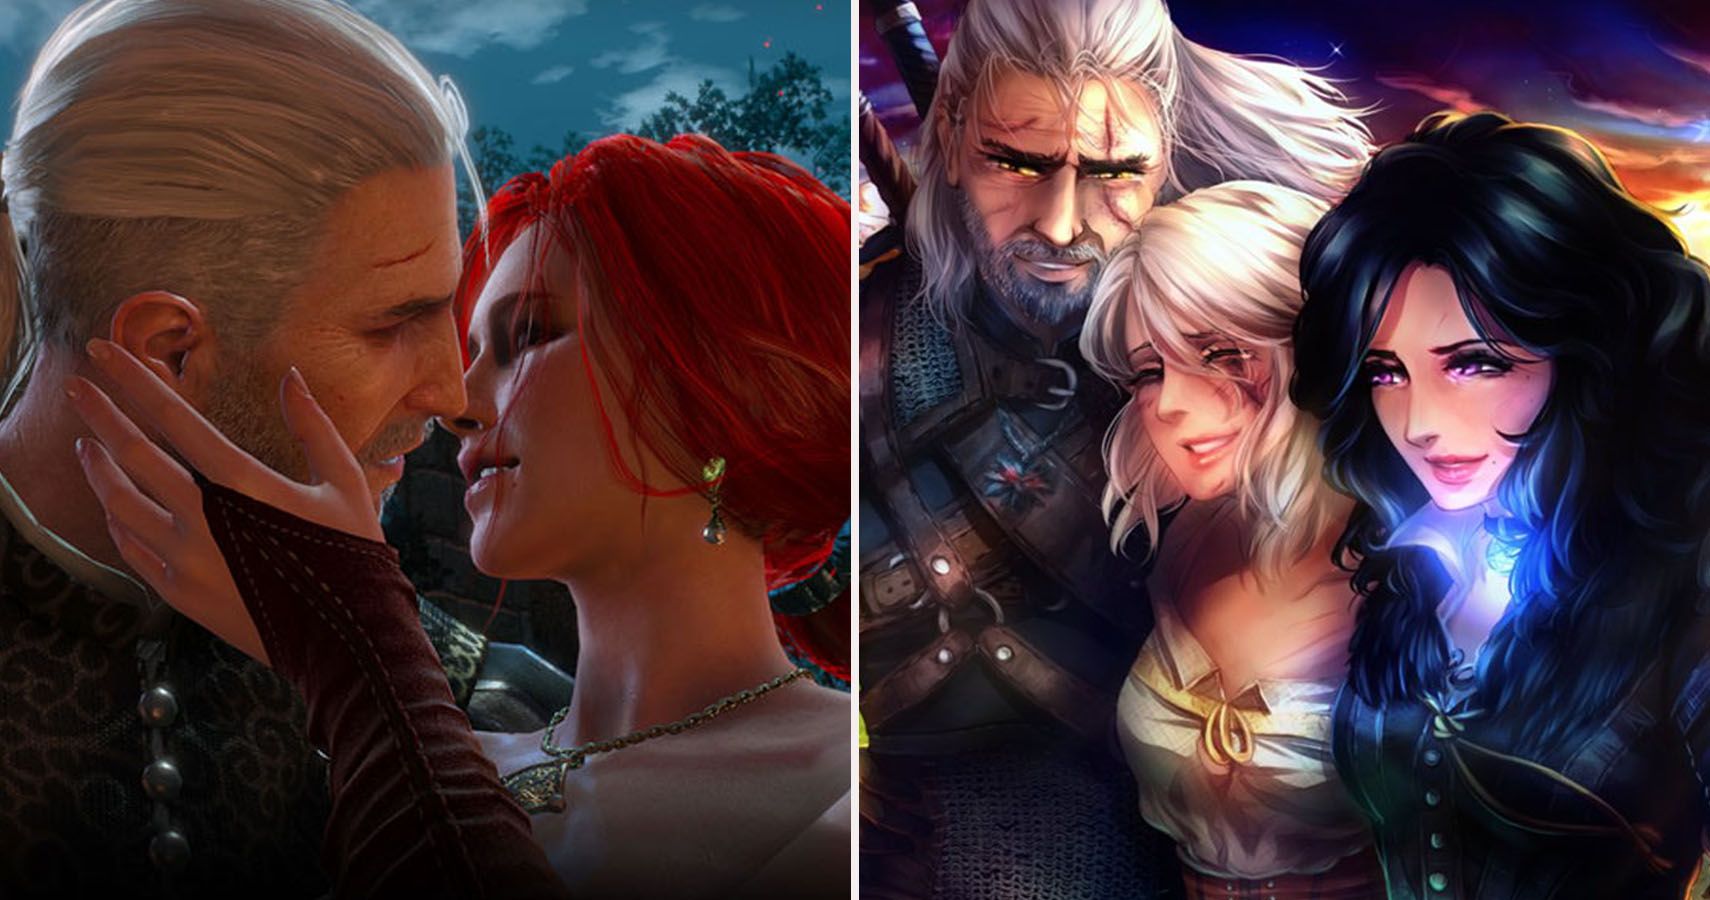 15 Times The Witcher Series BUTCHERED The Books